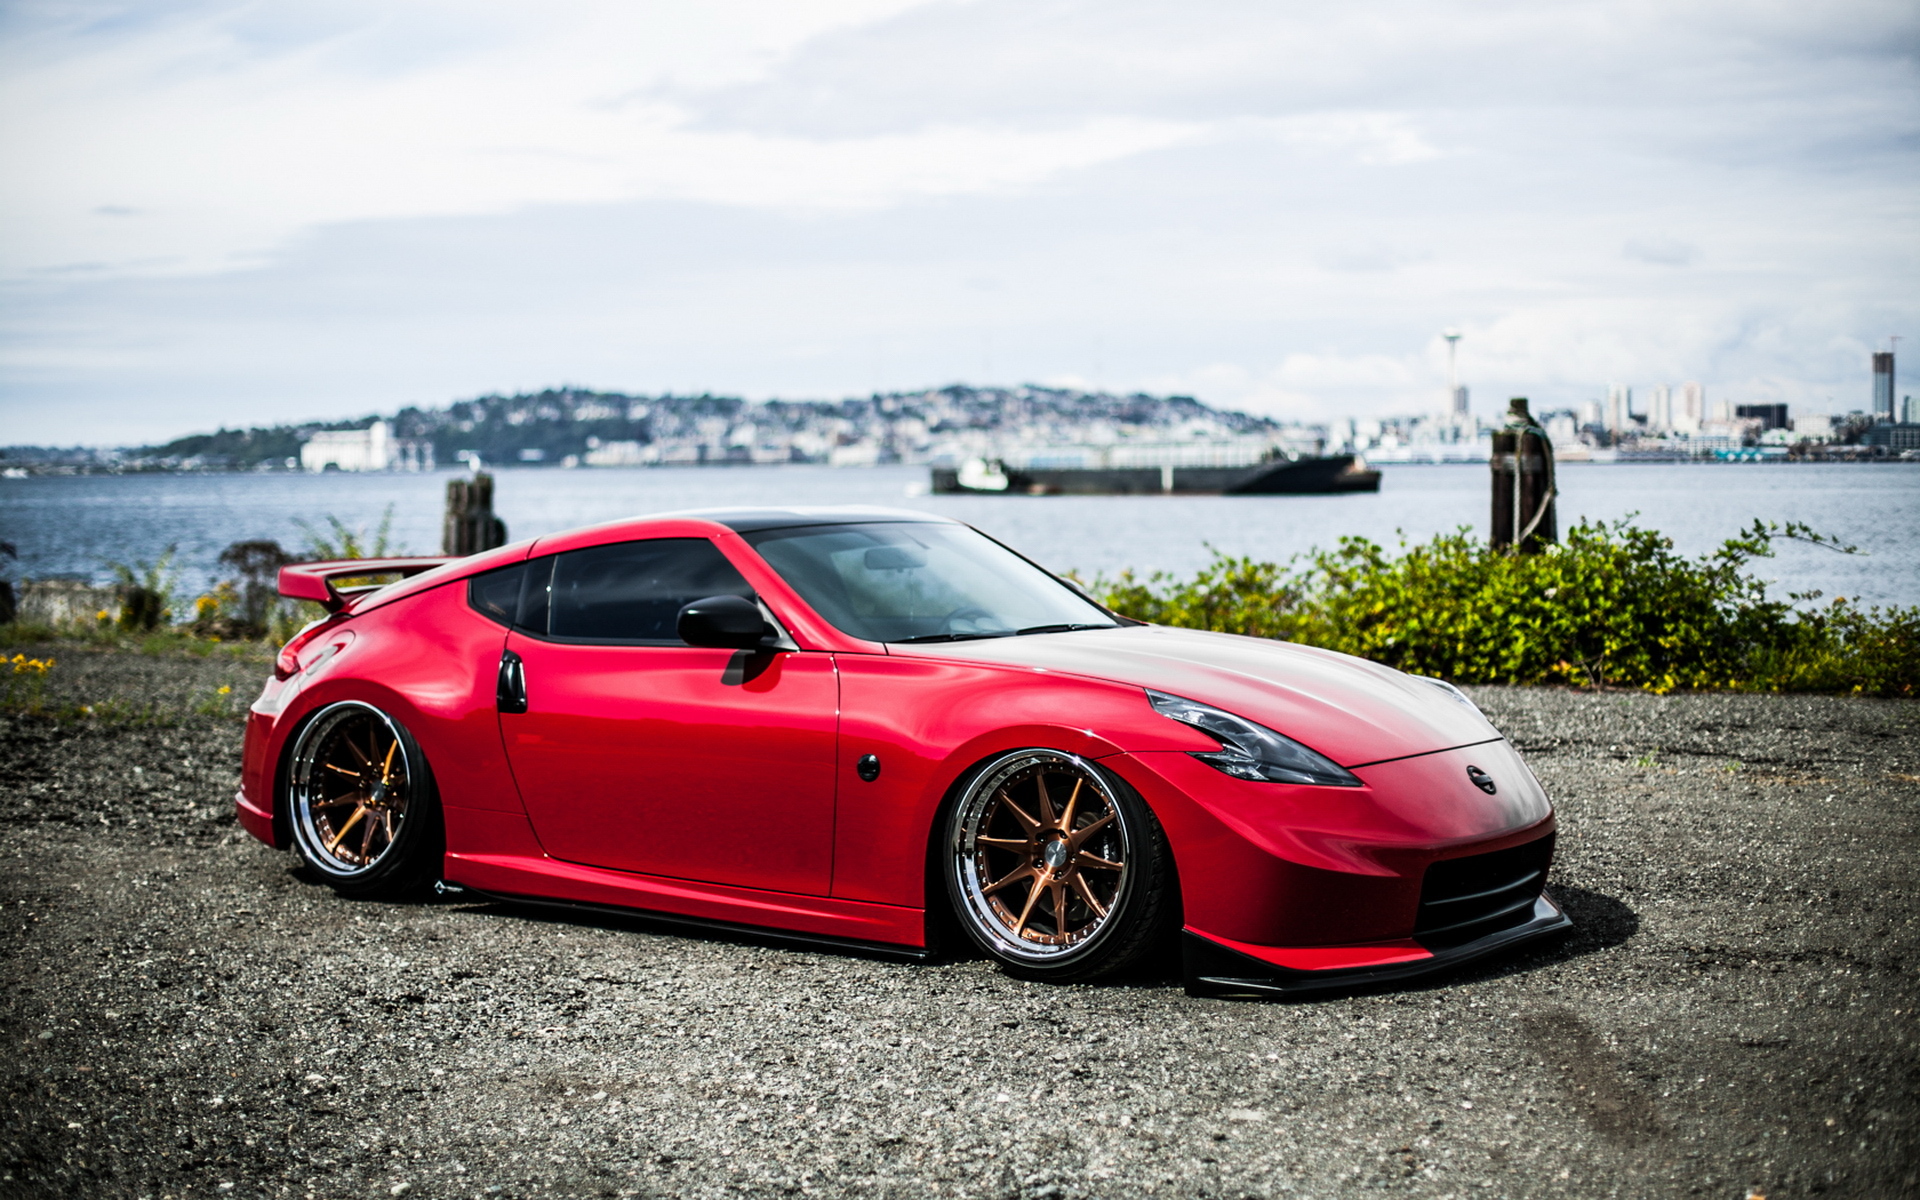 Wallpaper Nissan 370z Tuning Car Stance Red